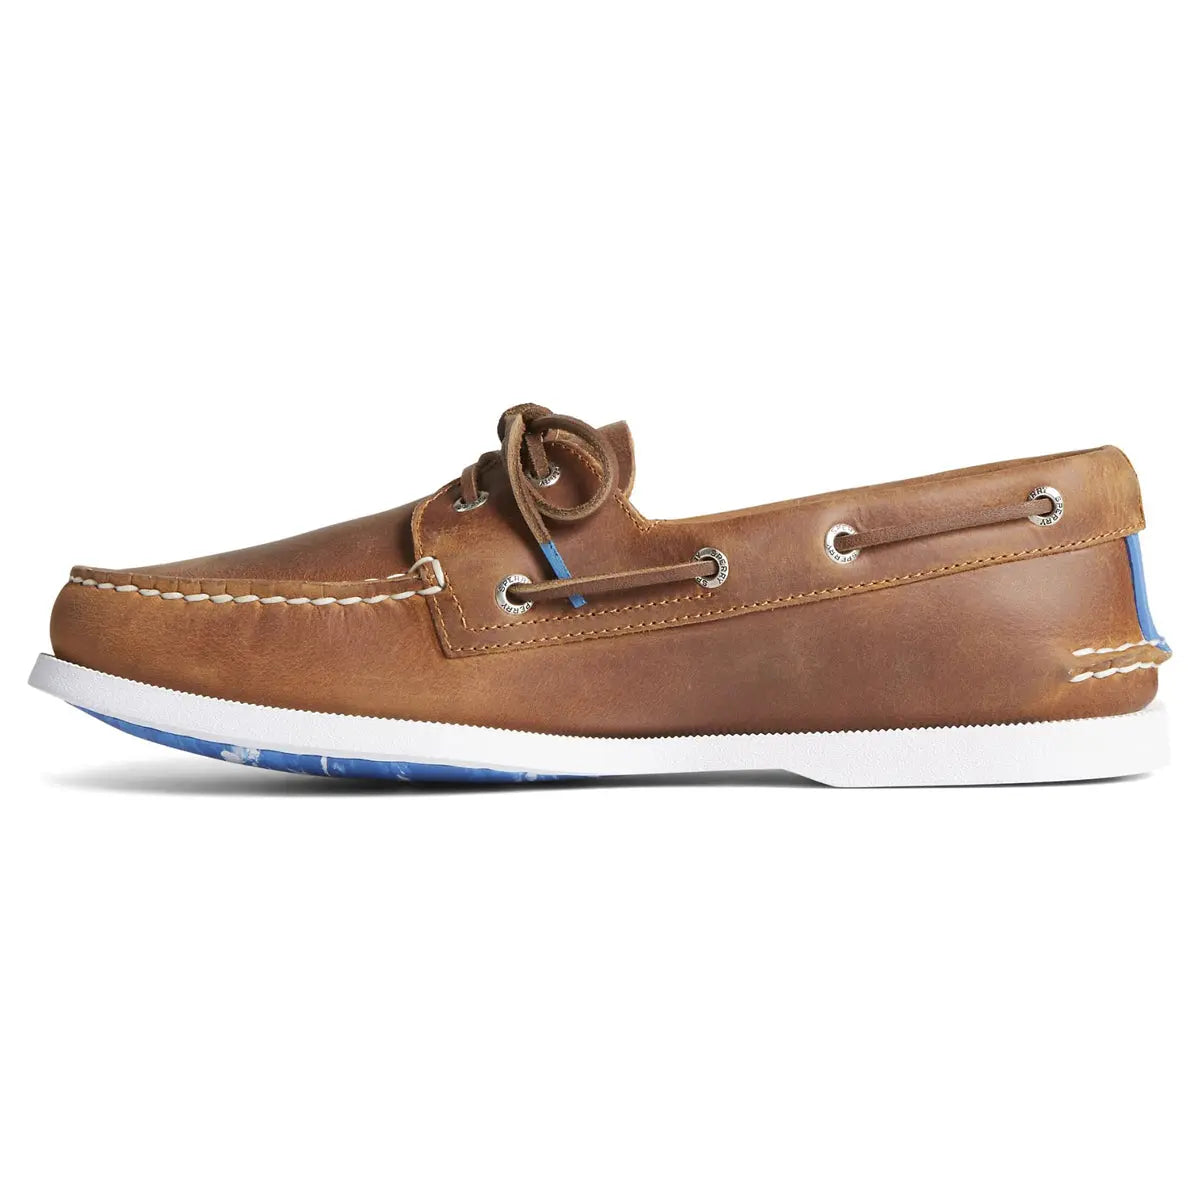 Tan Authentic Original ‘PullUp’ Boat Shoe  Sperry   